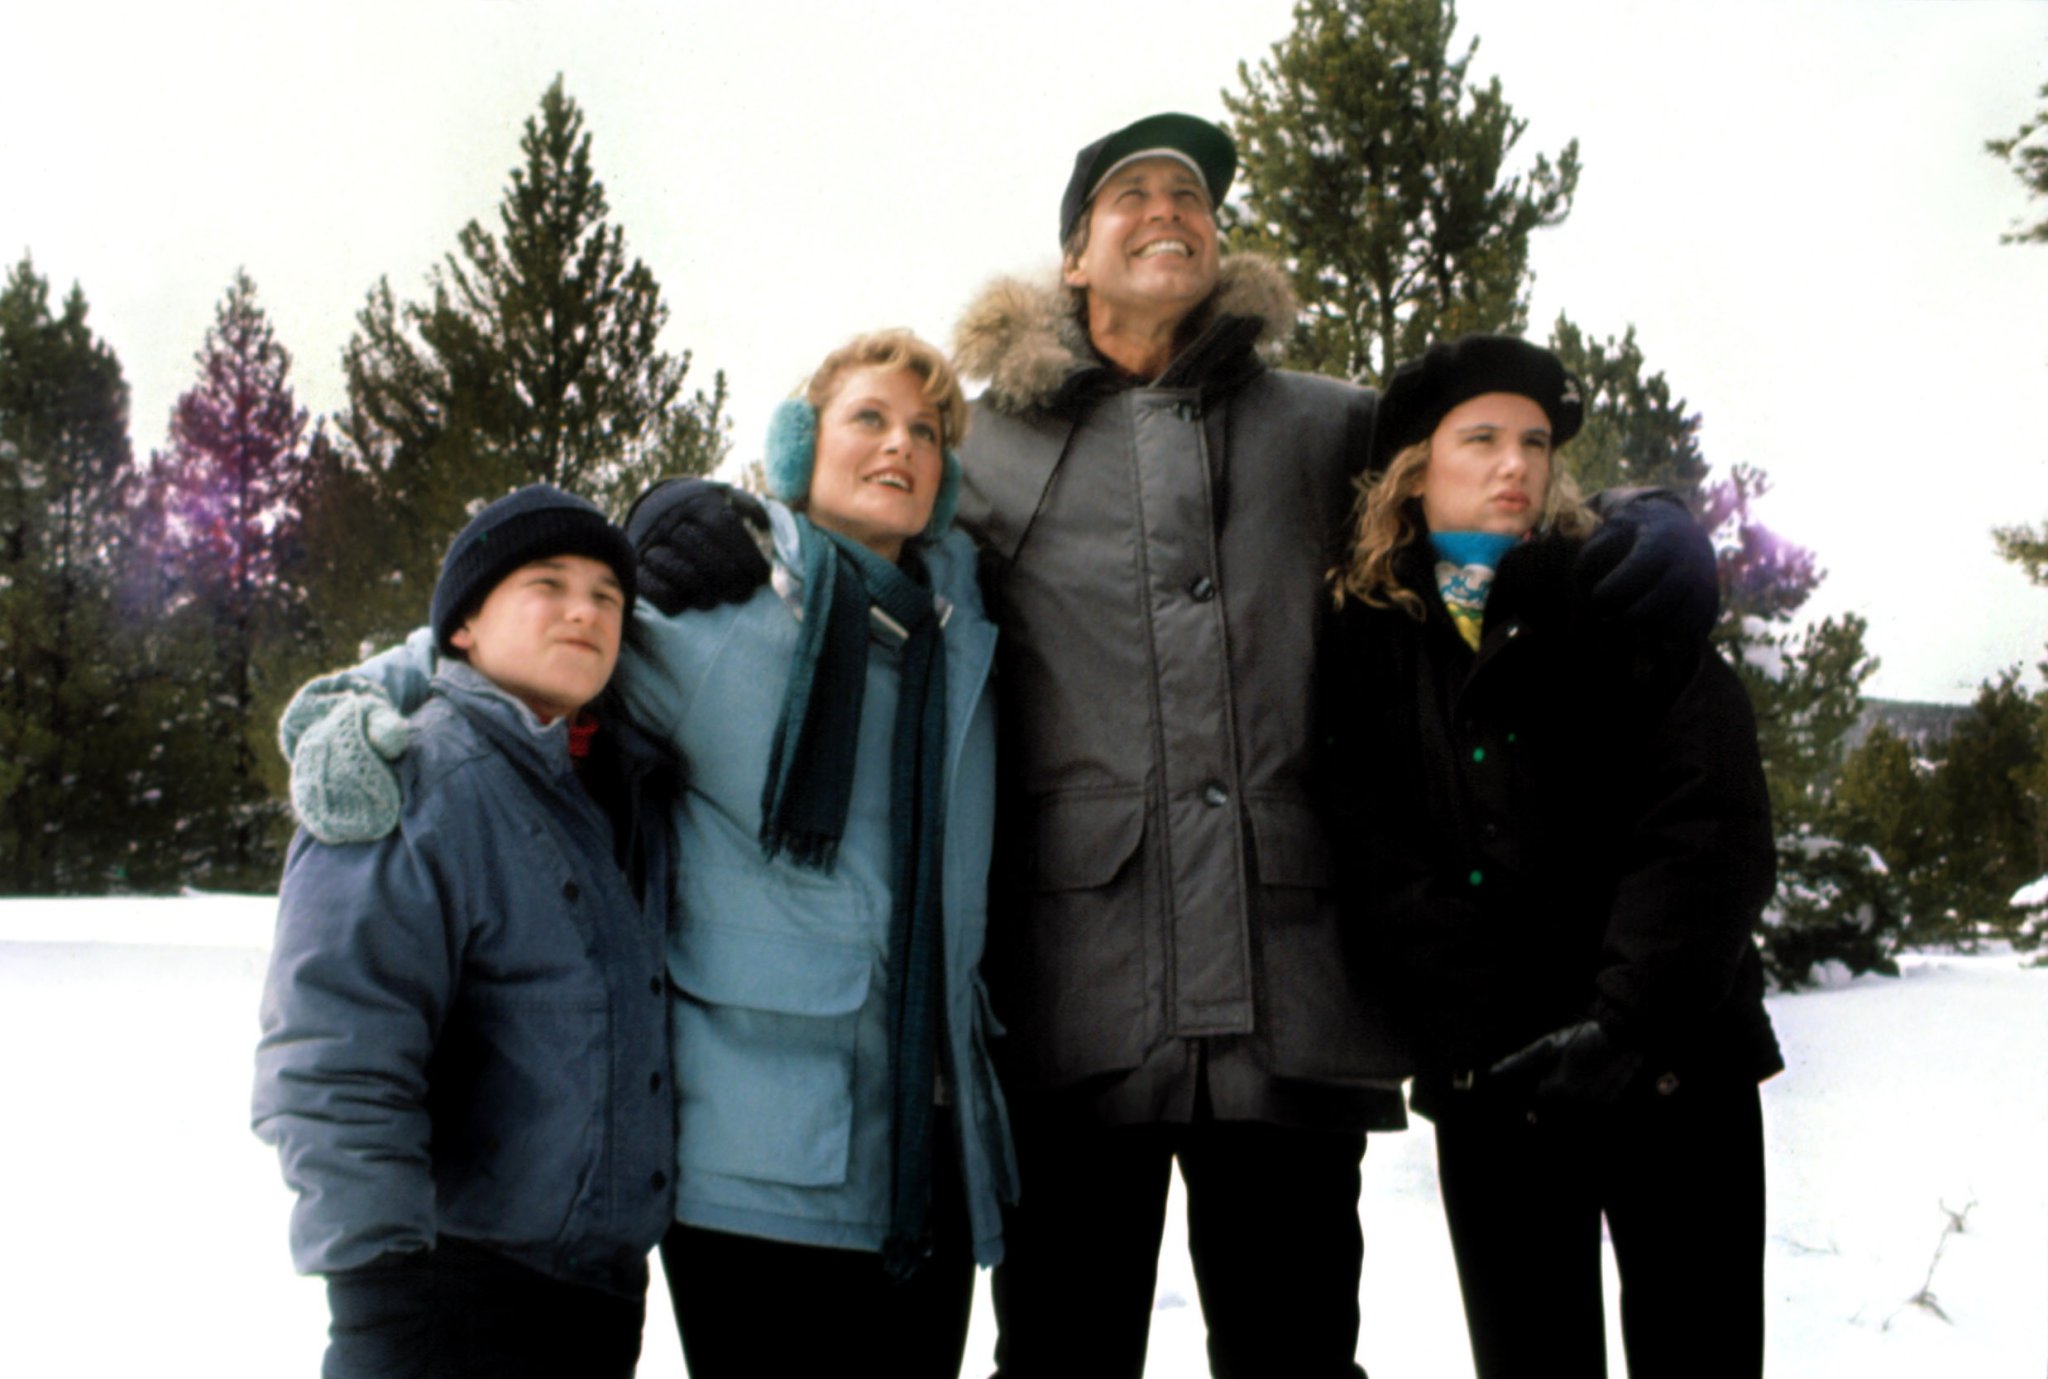 The Untold, No-Holds Barred Story of 'Christmas Vacation'